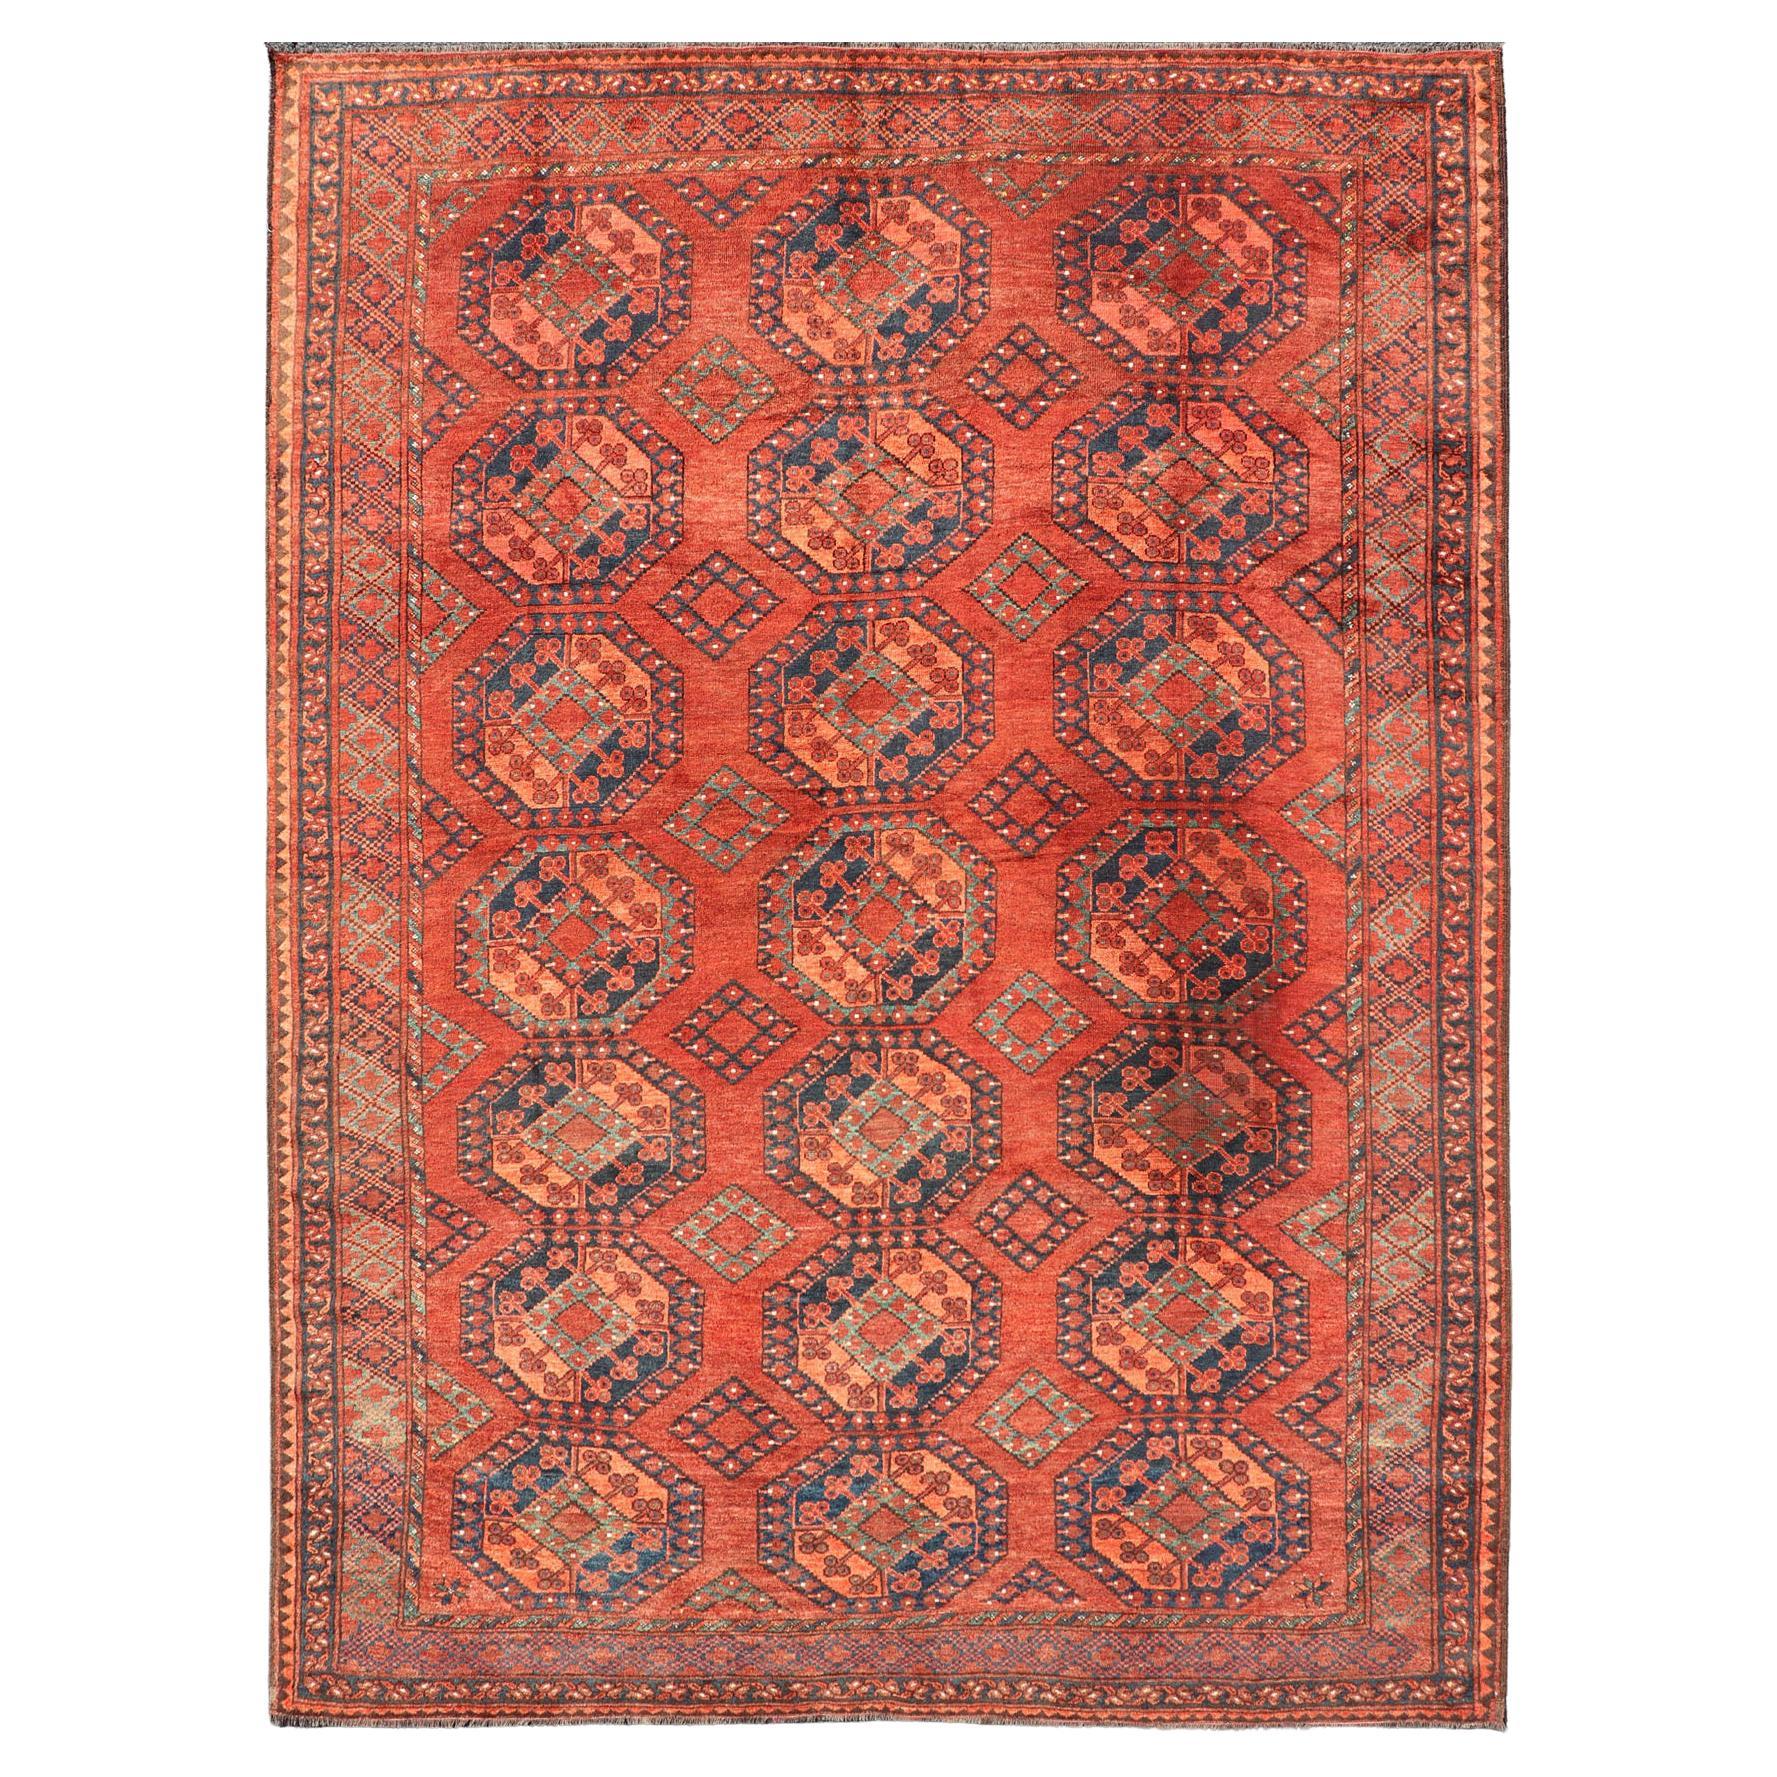 Early 20th Century Hand-Knotted Turkomen Ersari Rug in Wool with Gul Design For Sale